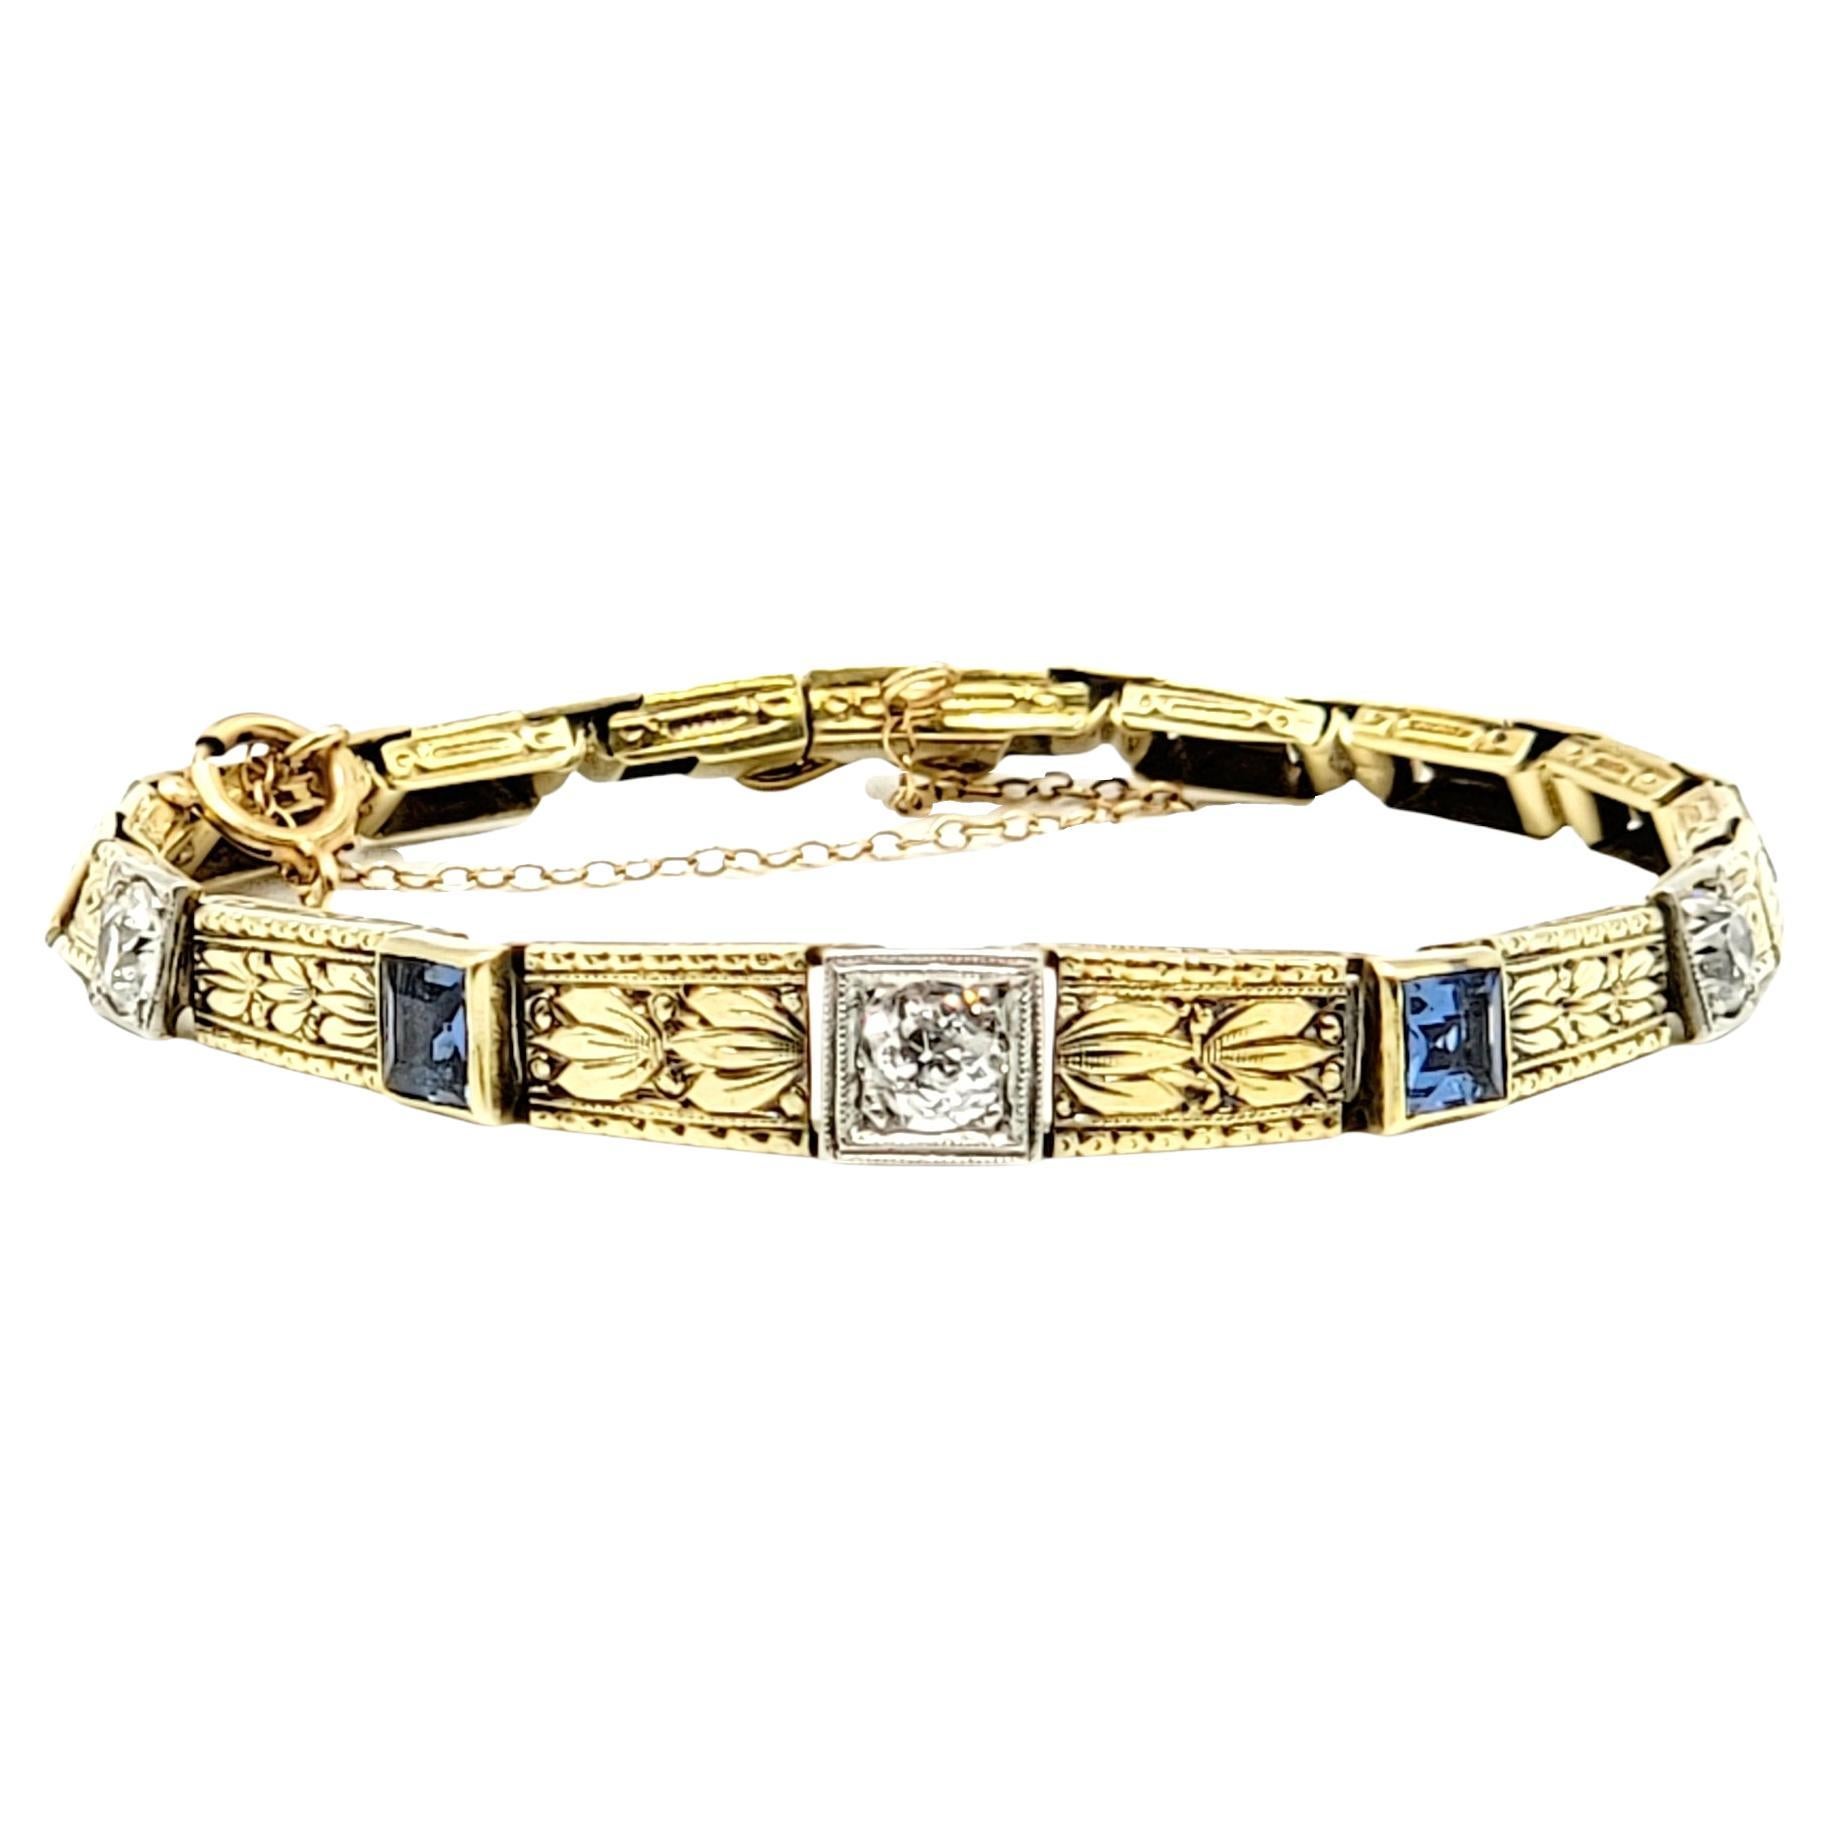 Vintage 1.13 Carats Total Diamond and Sapphire Bracelet in 18 Karat Yellow Gold